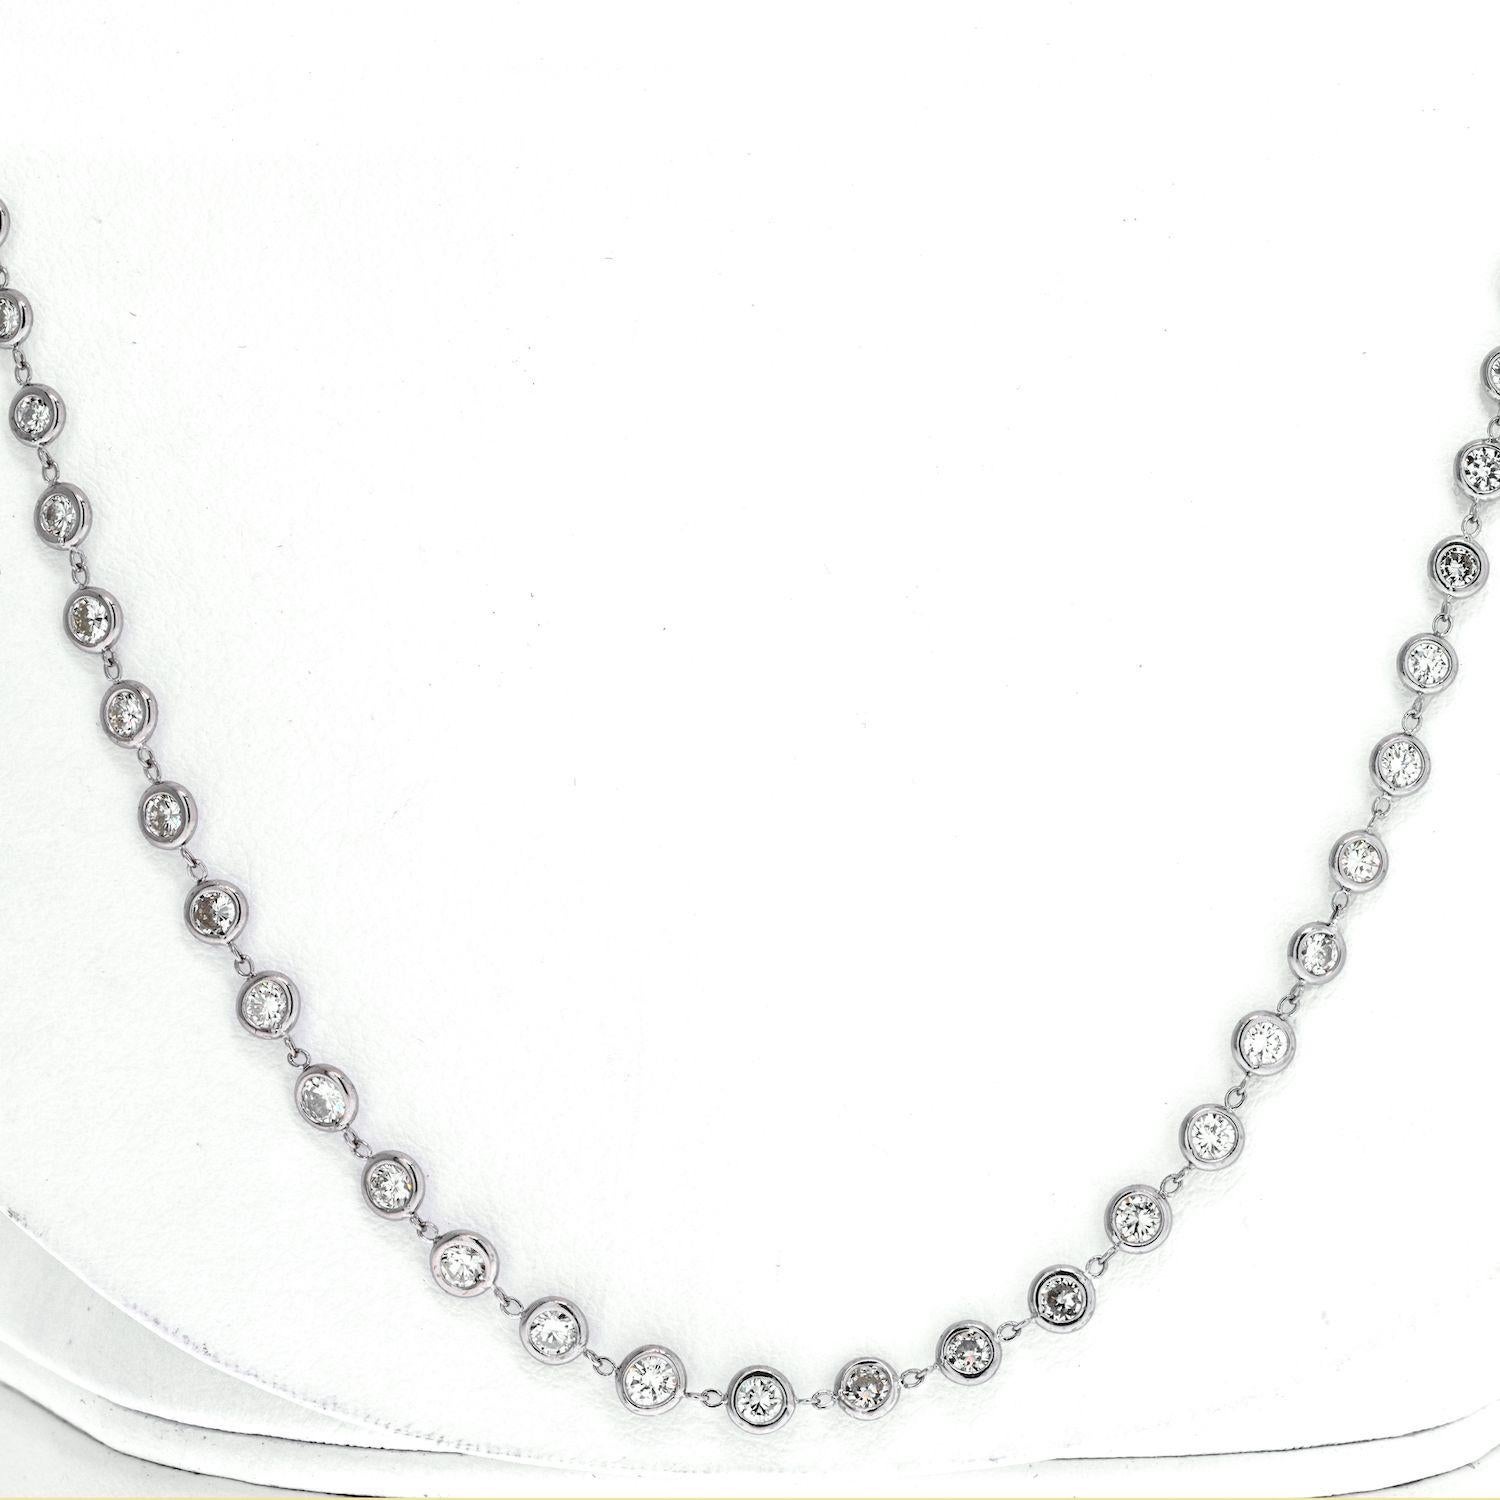 Stunning diamond by the yard chain is something any woman can use in her daily ensemble: over a white T or over a blouse, wearing little black dress, or just when in a flirty sweater diamond by the yard is your perfect accessory.